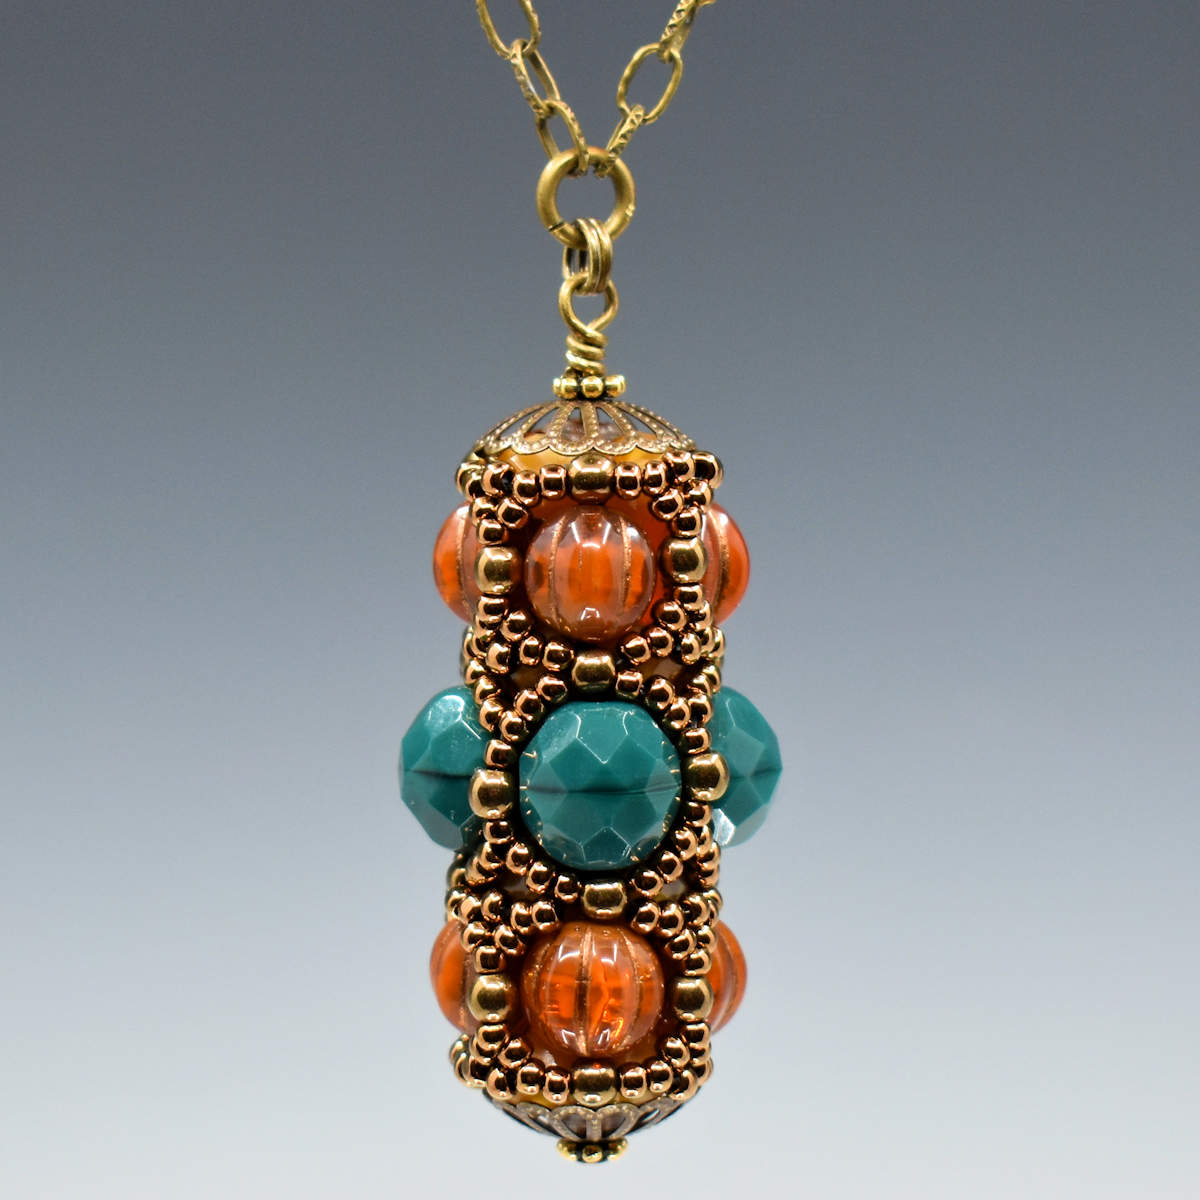 A forest green and rust brown pendant hanging from gold colored chain. The pendant is wider in the middle, with green beads that have an internal mold stripe at their centers. On the upper and lower rows are ridged semi-transparent rust rounds. The whole pendant is overlaid with a netting of gold seed beads and capped with golden filigree style findings.